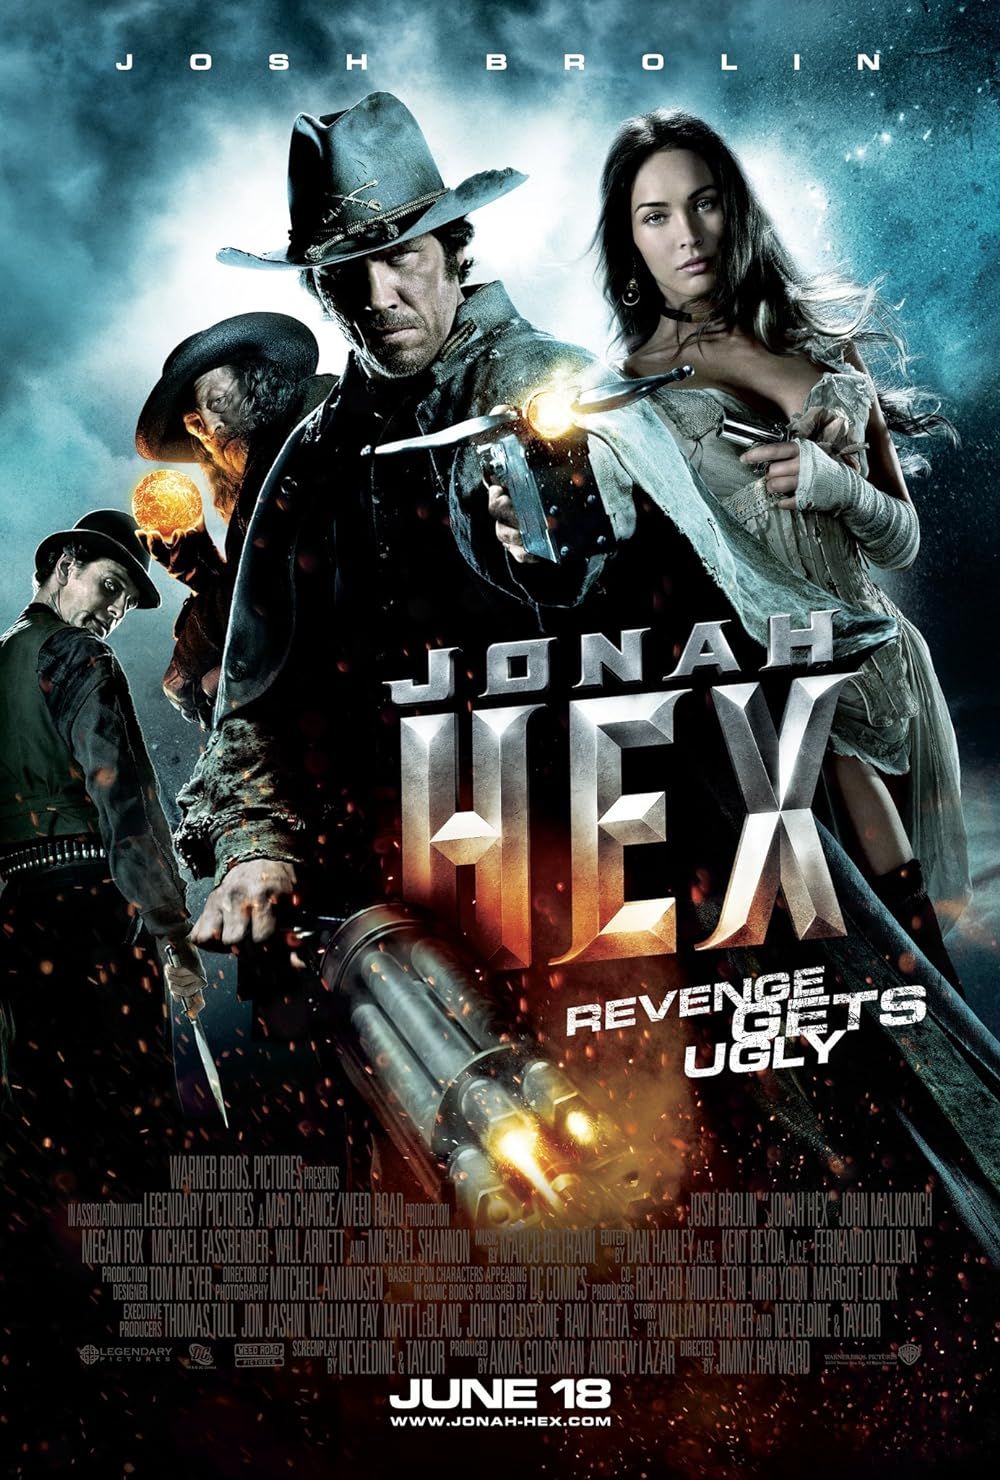 The Cast on the Jonah Hex Poster